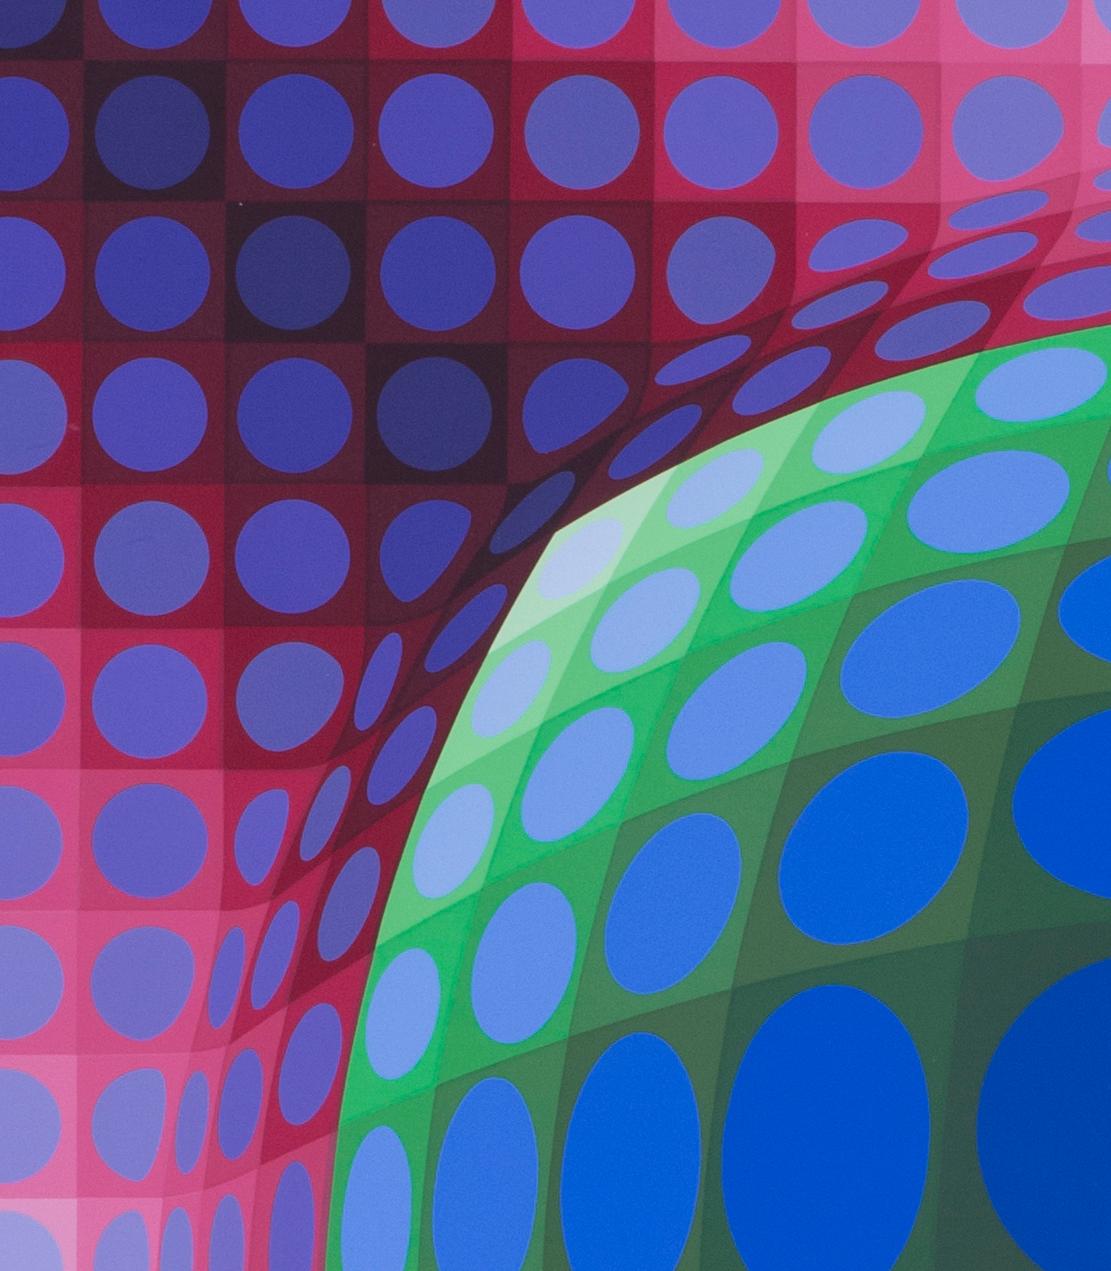 Syry, 1978 - Op Art Print by Victor Vasarely